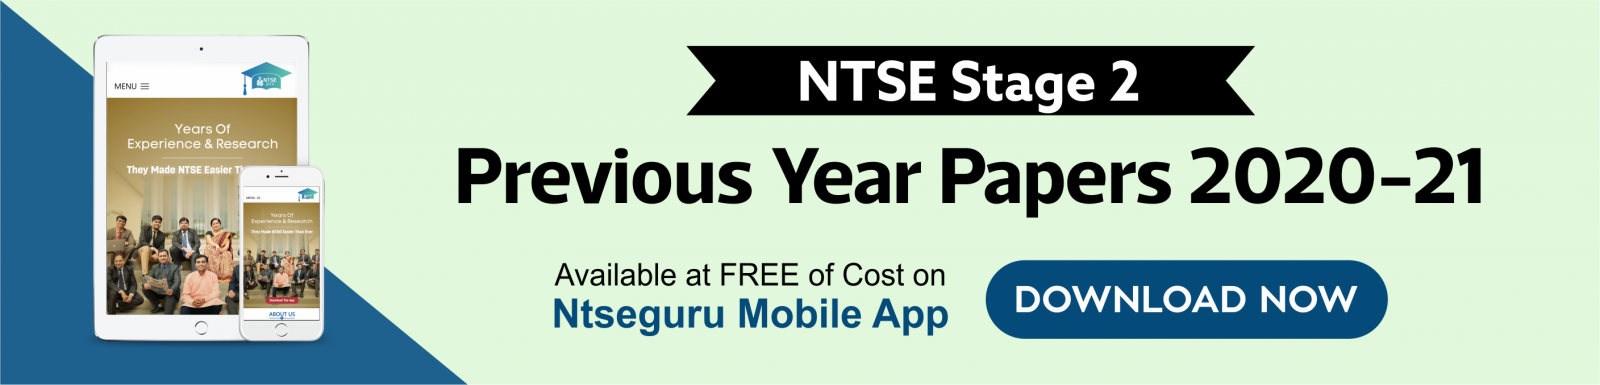 NTSE Stage 2 Previous Year Papers 2020-21